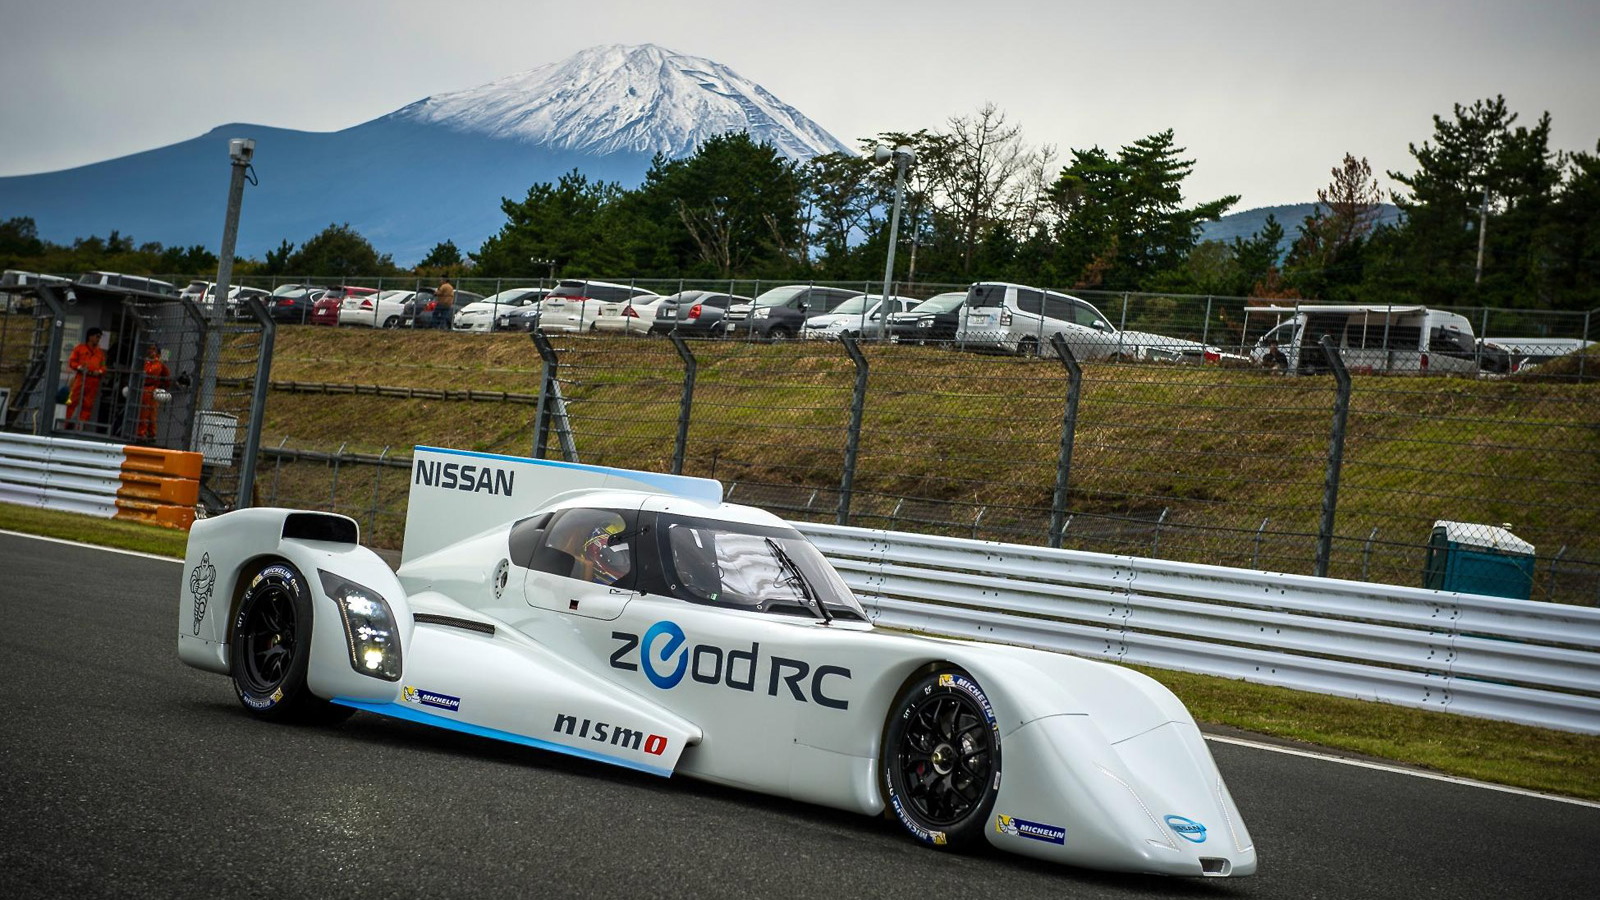 2014 Nissan ZEOD RC Le Mans prototype makes track debut at Fuji Speedway